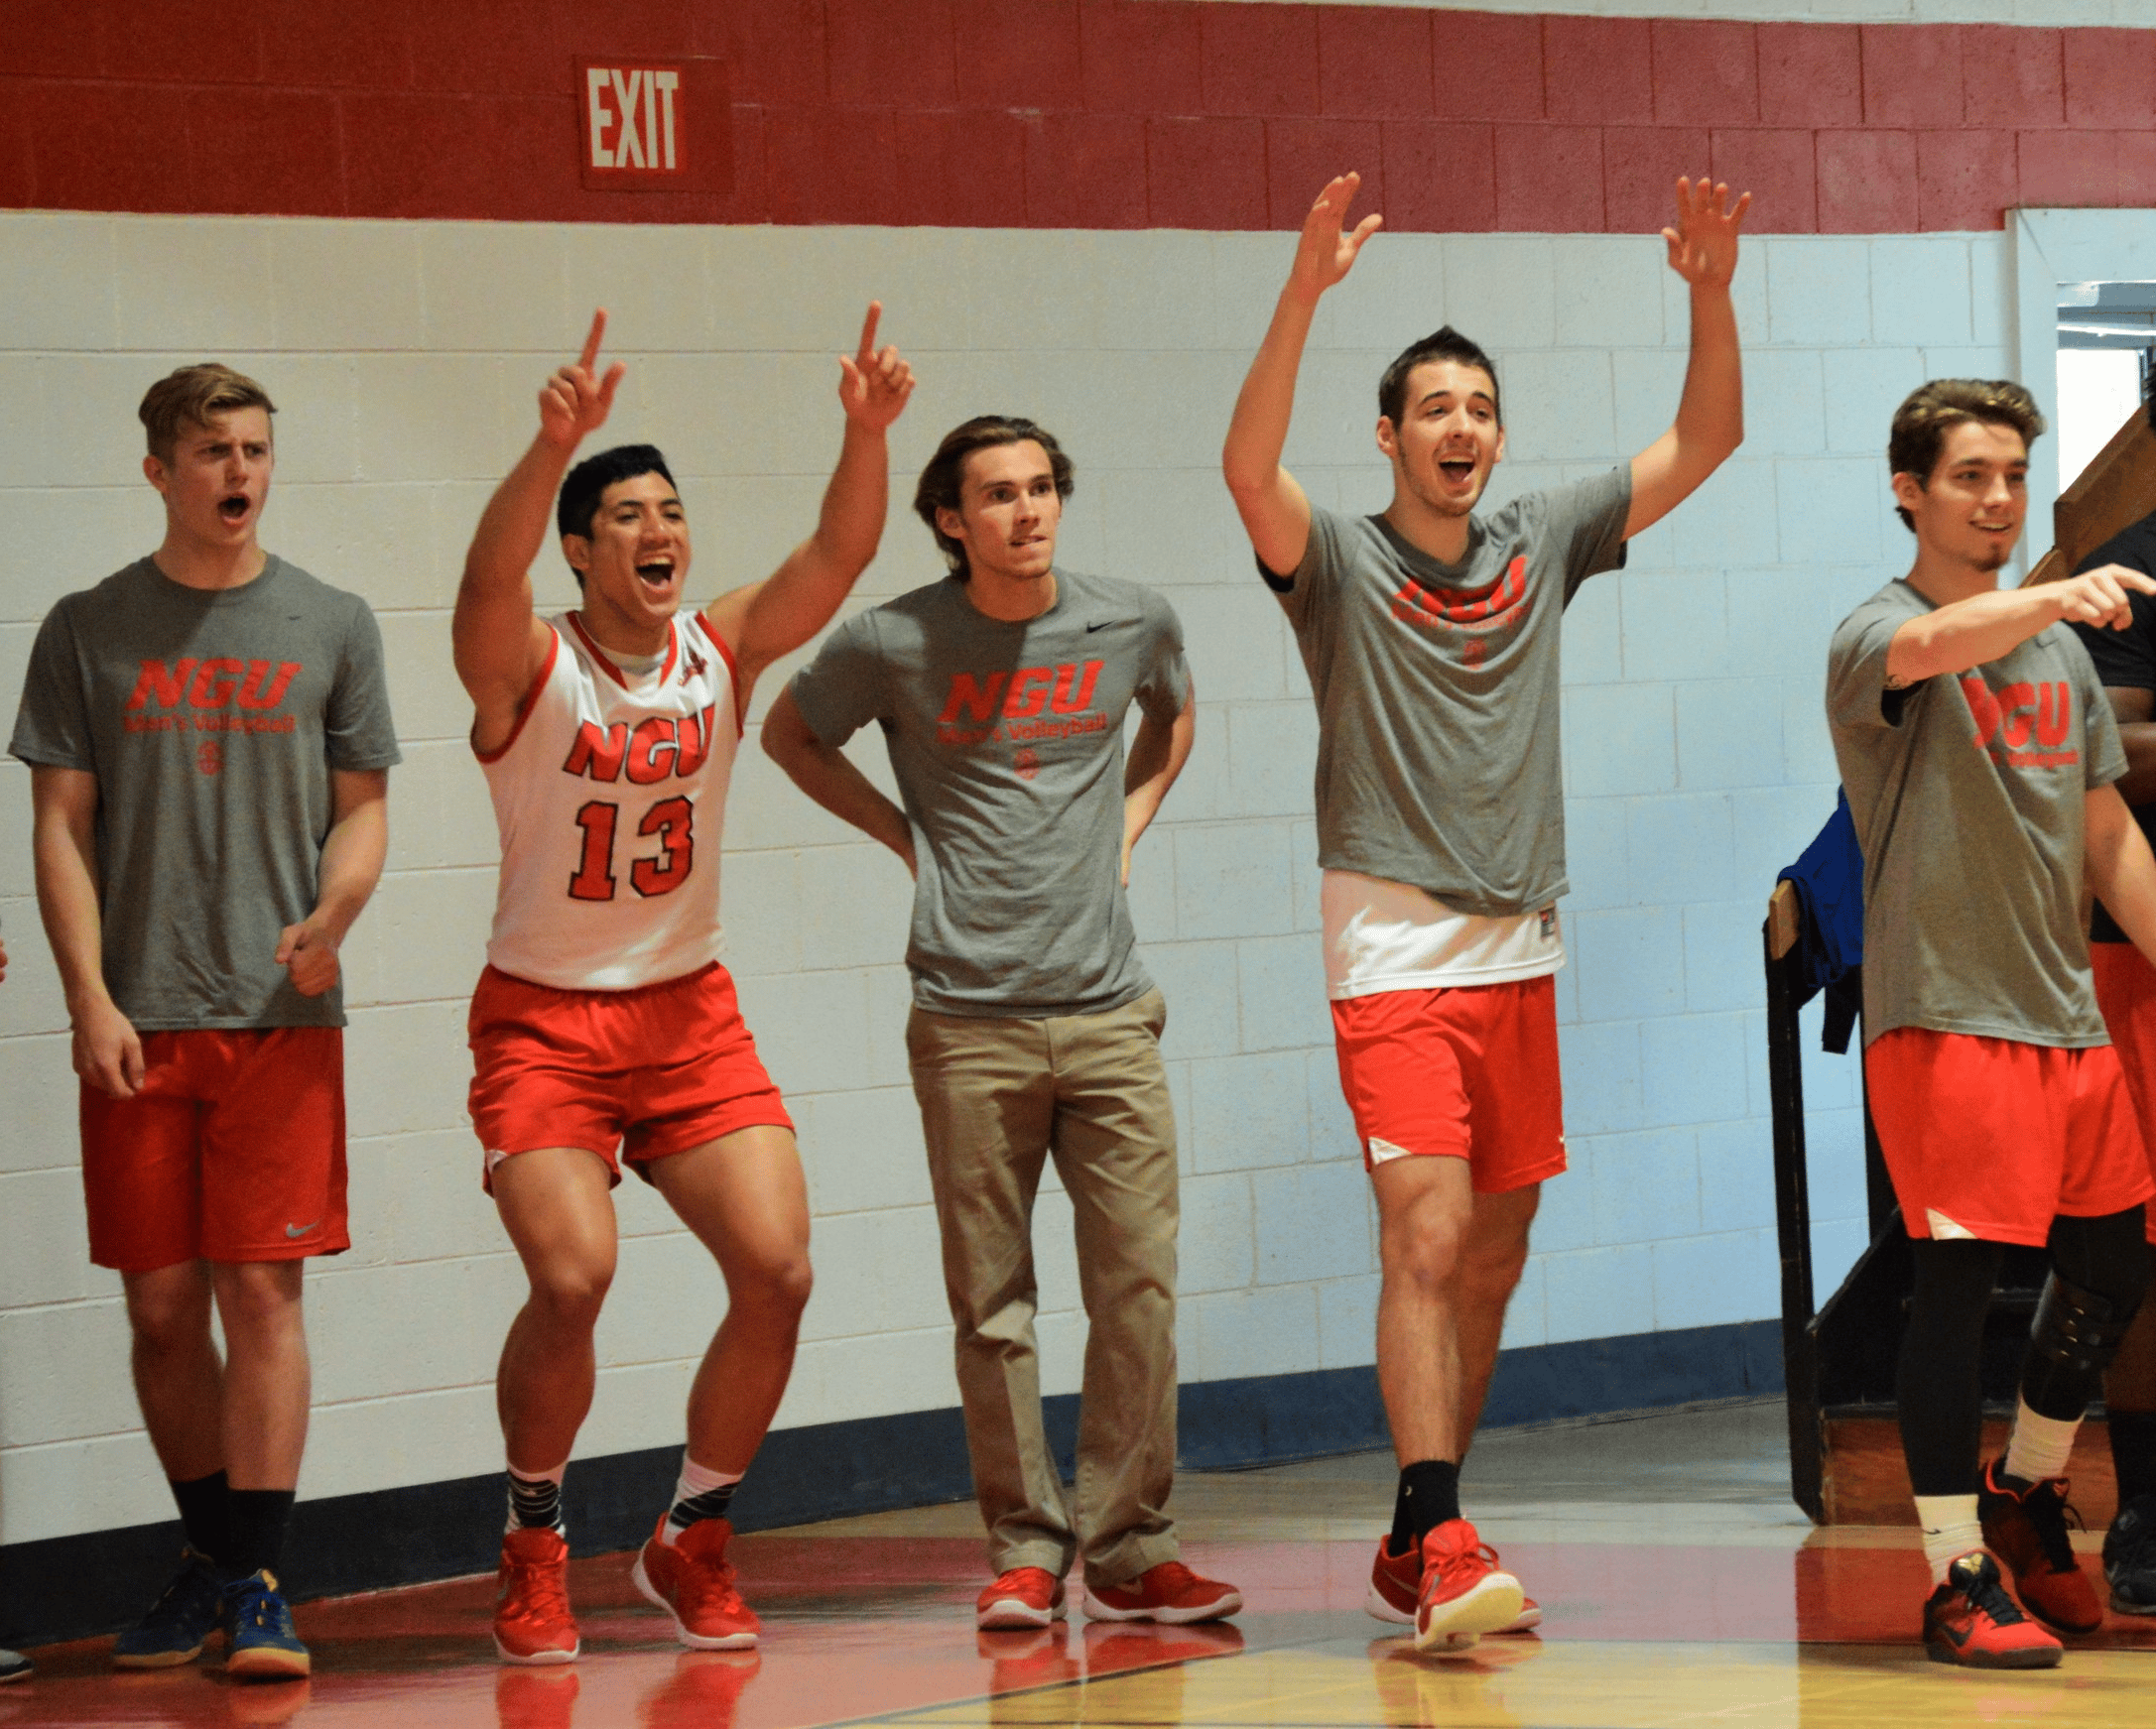 Andrew Sorton, Luuga Vailuu, Luke Cabe, Grayson Lawrence and Silas Jenkins cheer for the team from the sidelines.